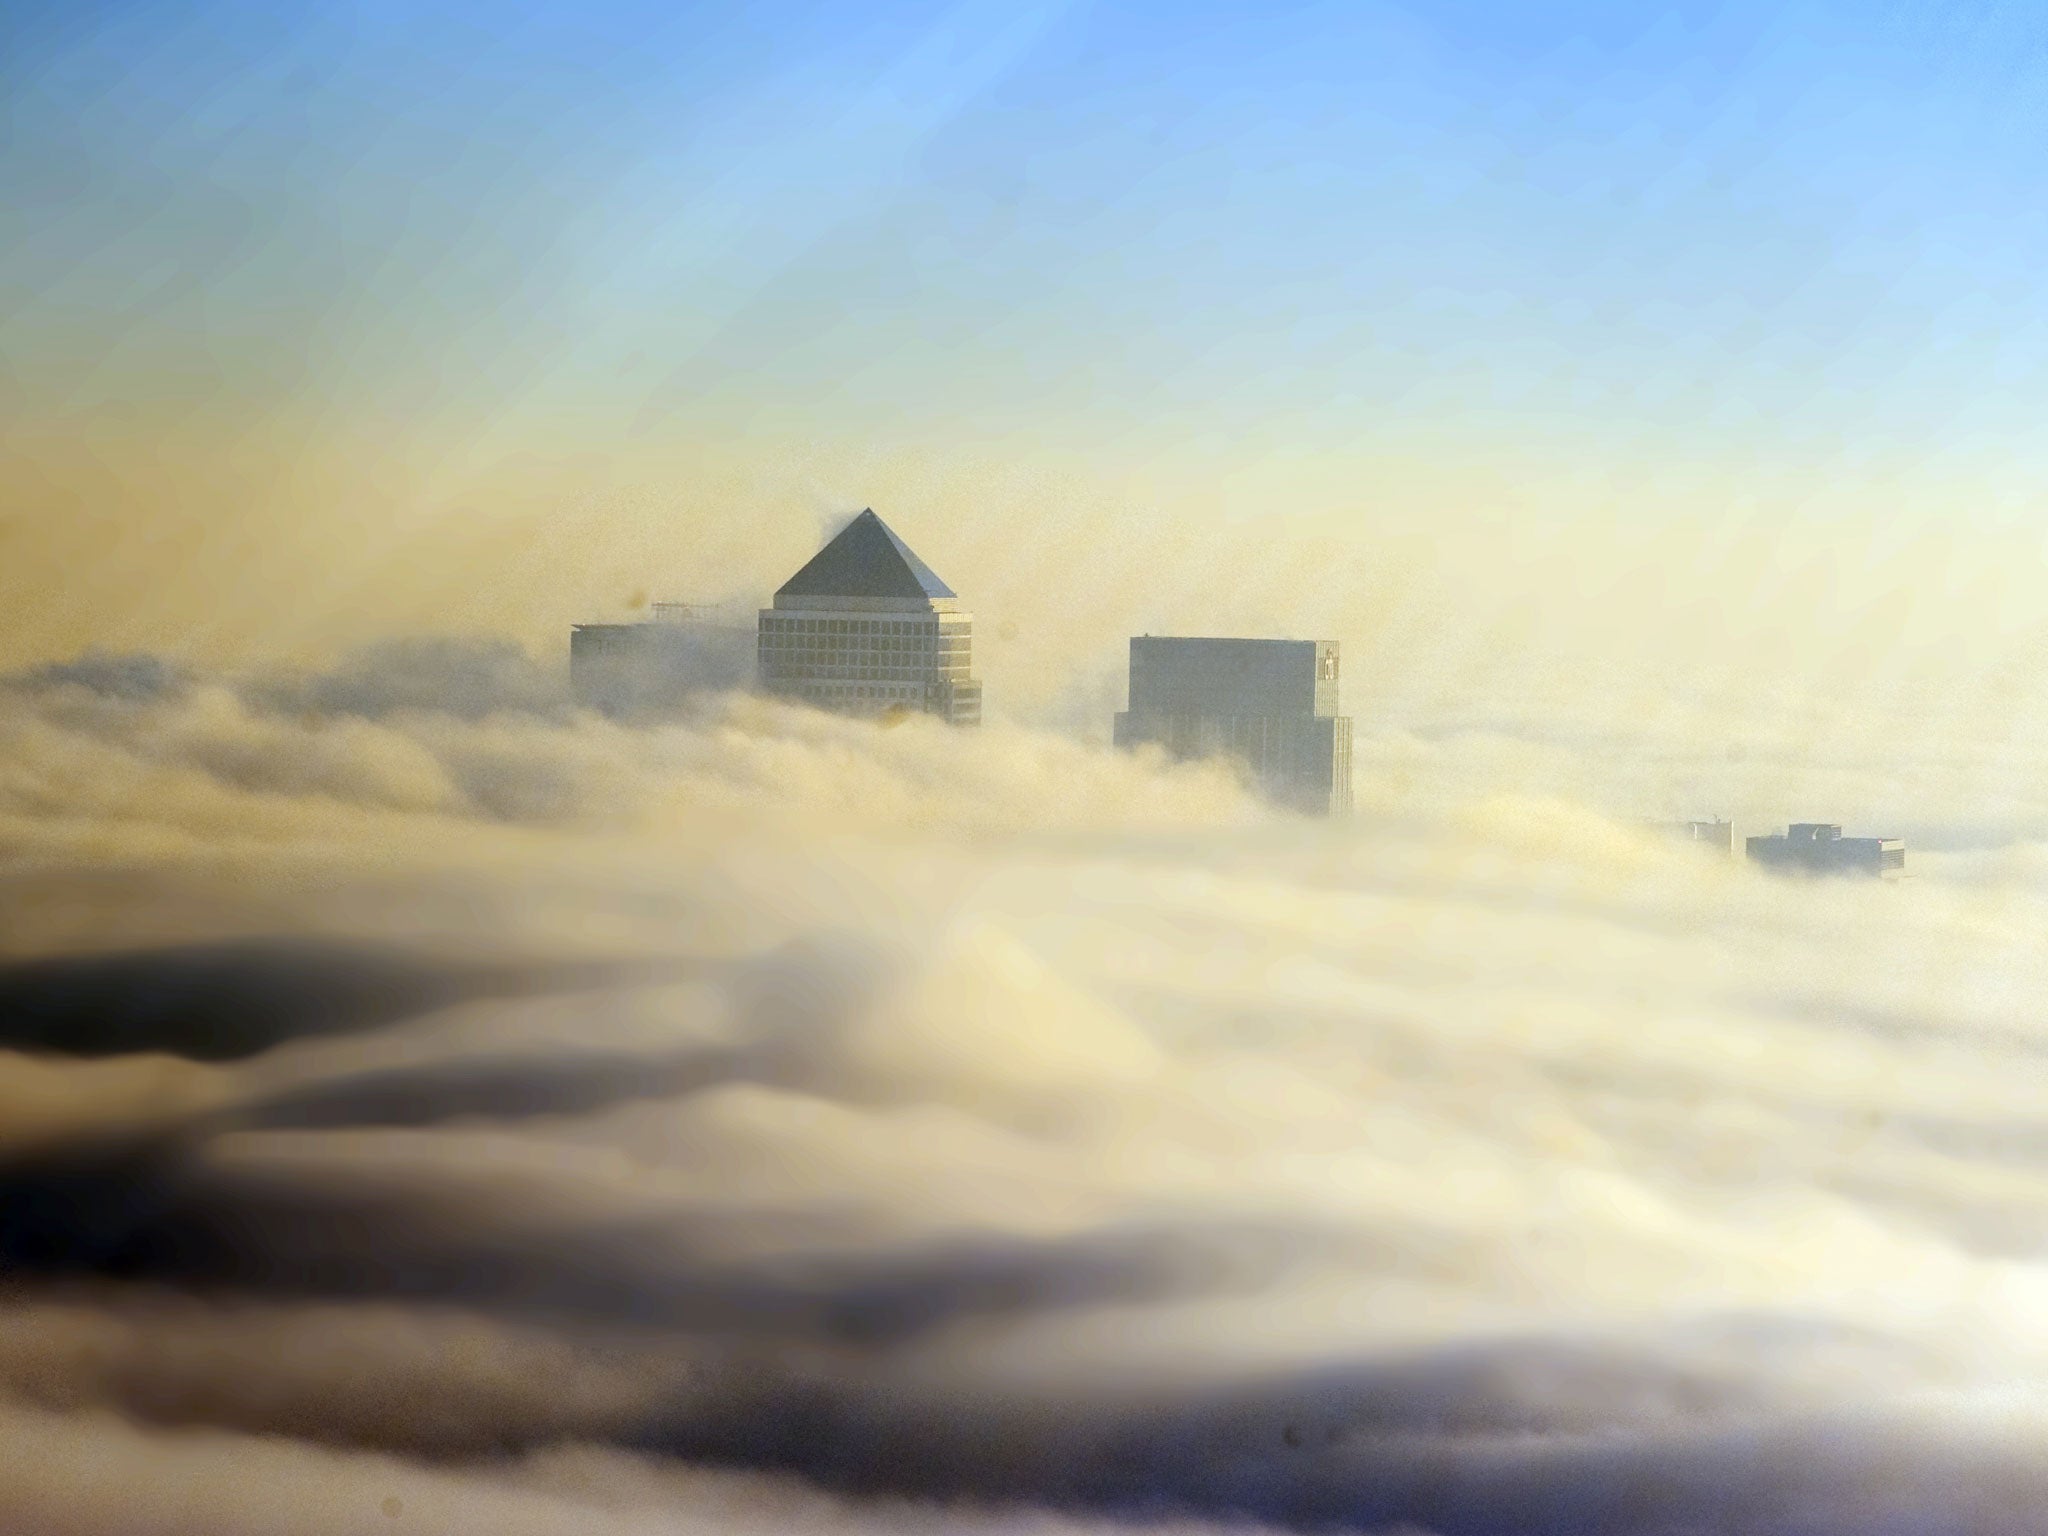 London's Canary Wharf, where the watchdog and many major banks are based, was covered in clouds this week